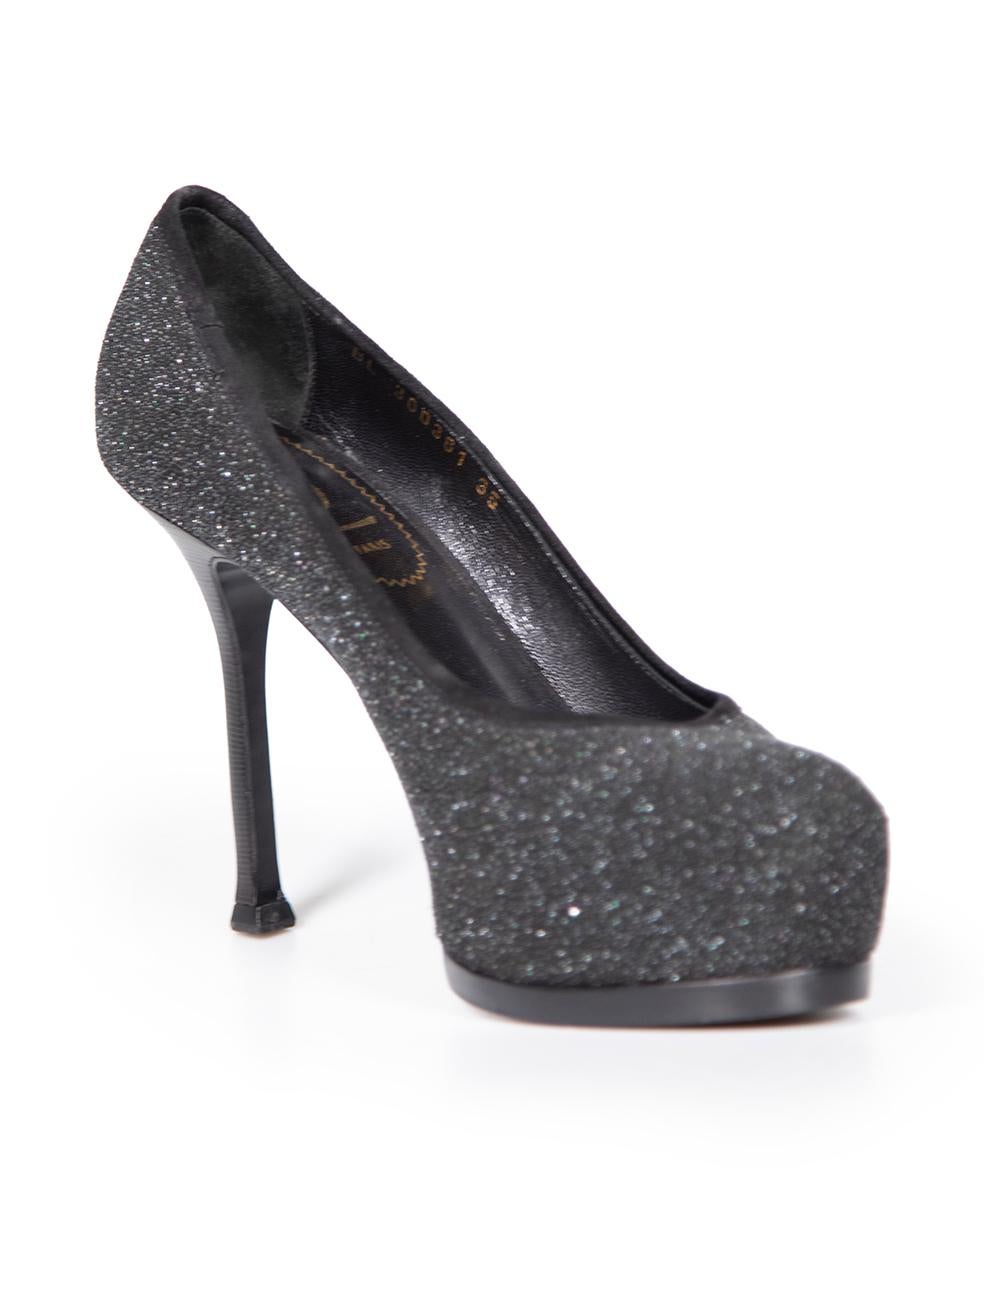 CONDITION is Very good. Minimal wear to shoes is evident. Minimal wear to both shoe heels with abrasions on this used Yves Saint Laurent designer resale item.
 
 Details
 Black
 Textured glitter
 Pumps
 Platform
 High heeled
 Slip on
 Round toe
 
 
